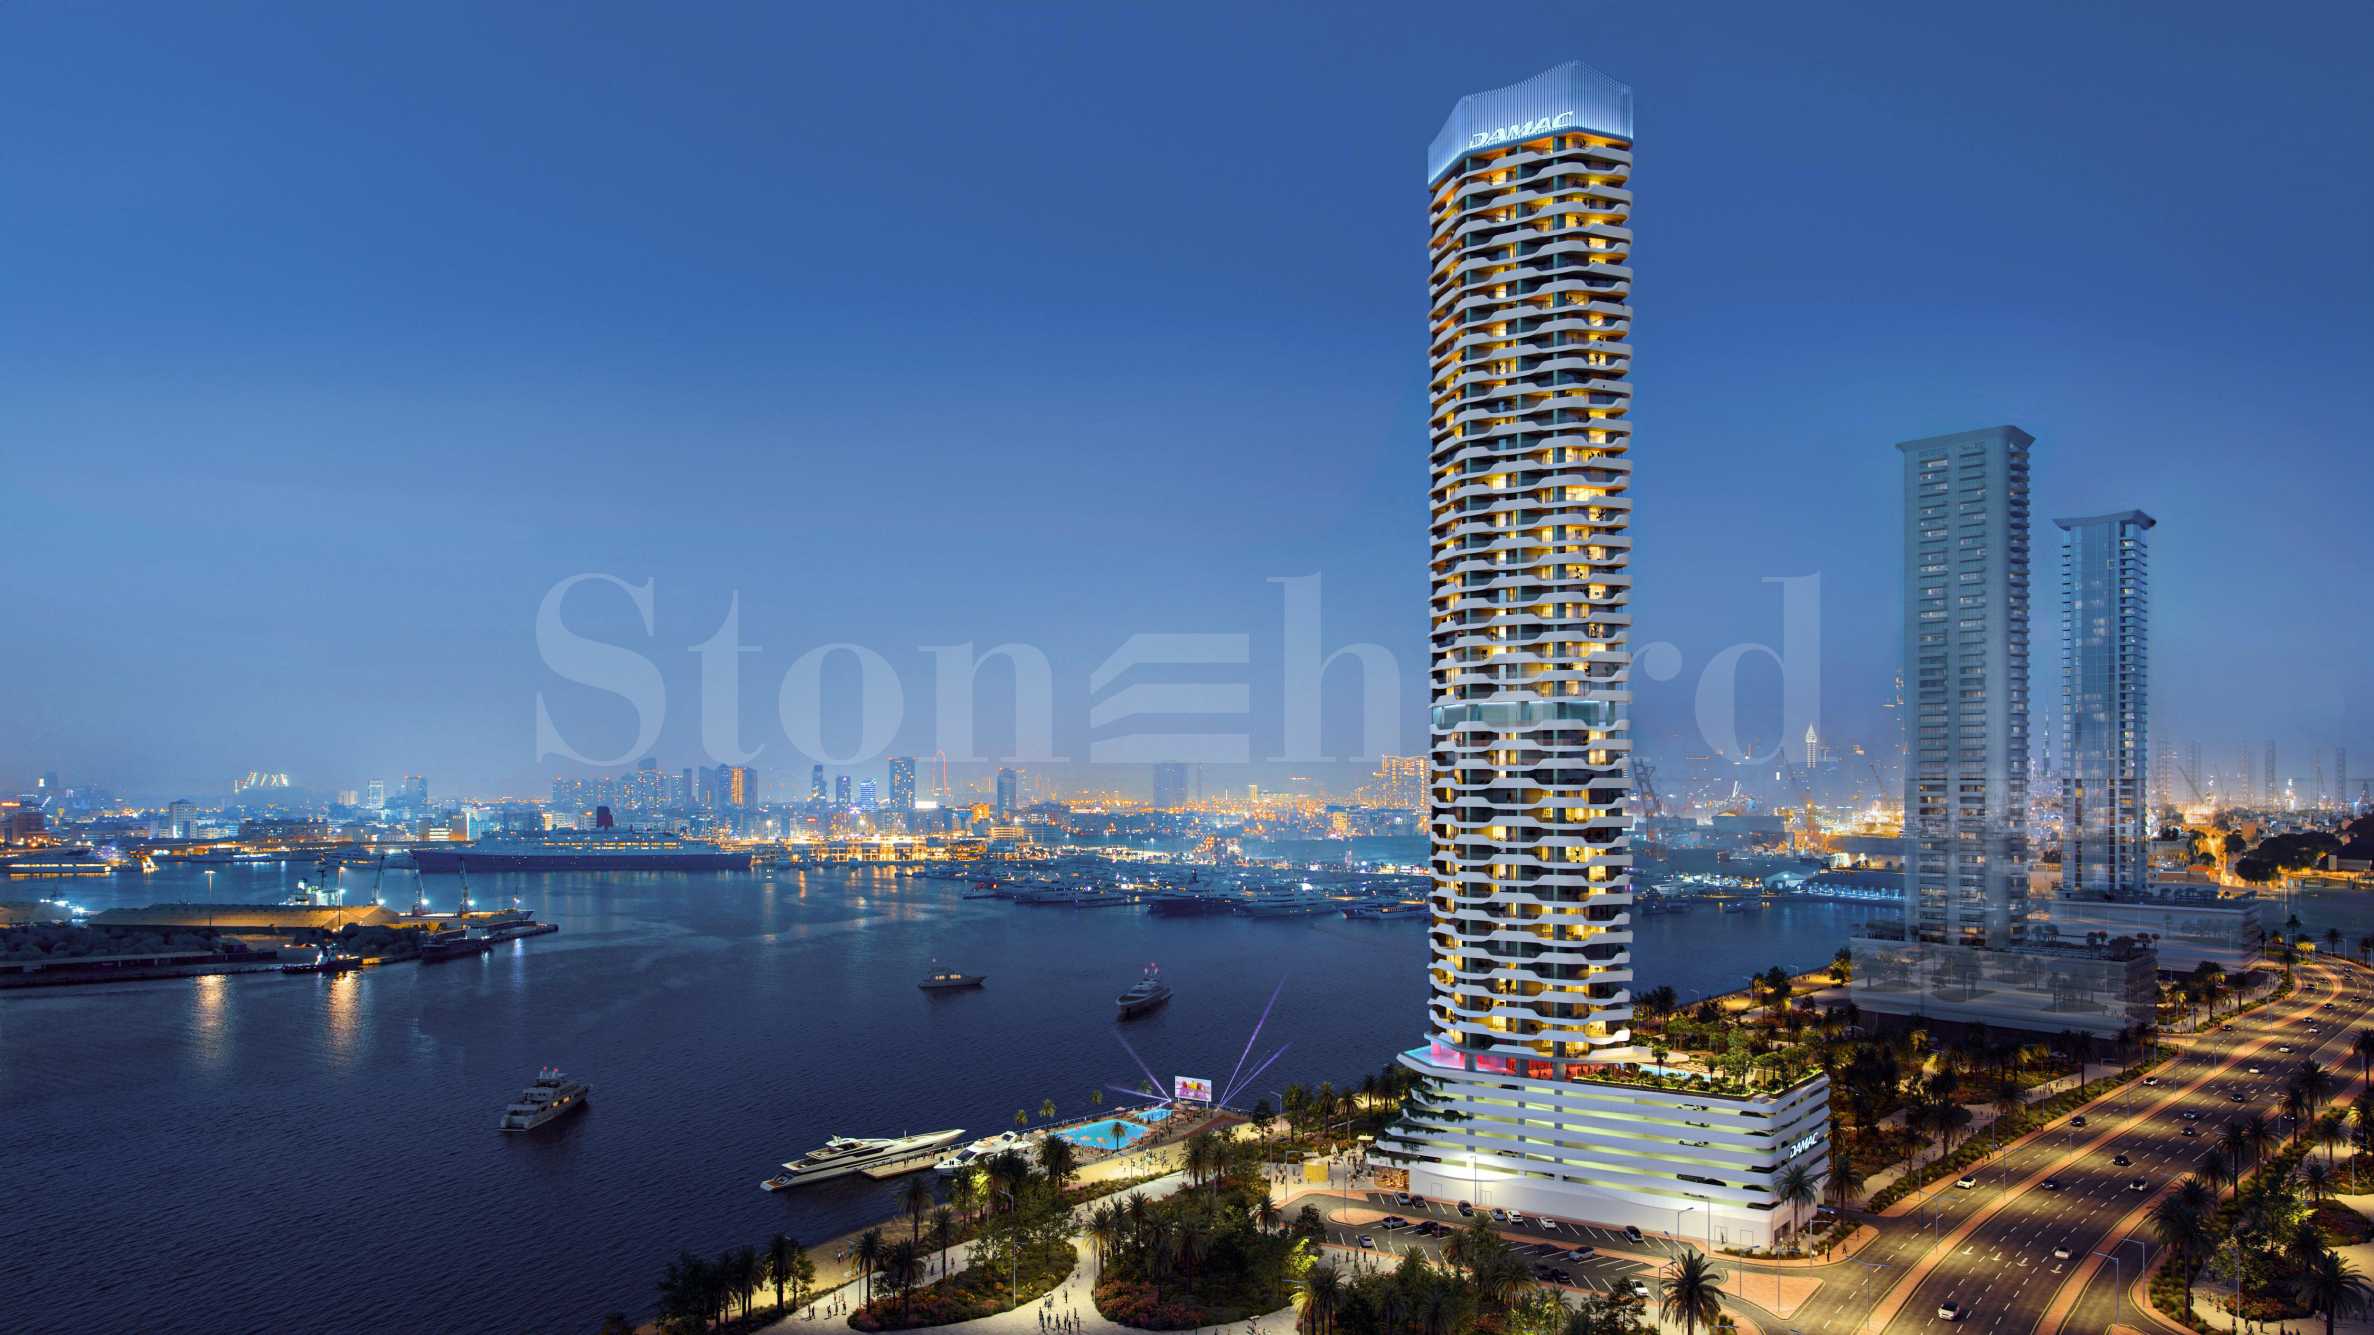 Apartments for sale in Coral Reef, Dubai Maritime City1 - Stonehard